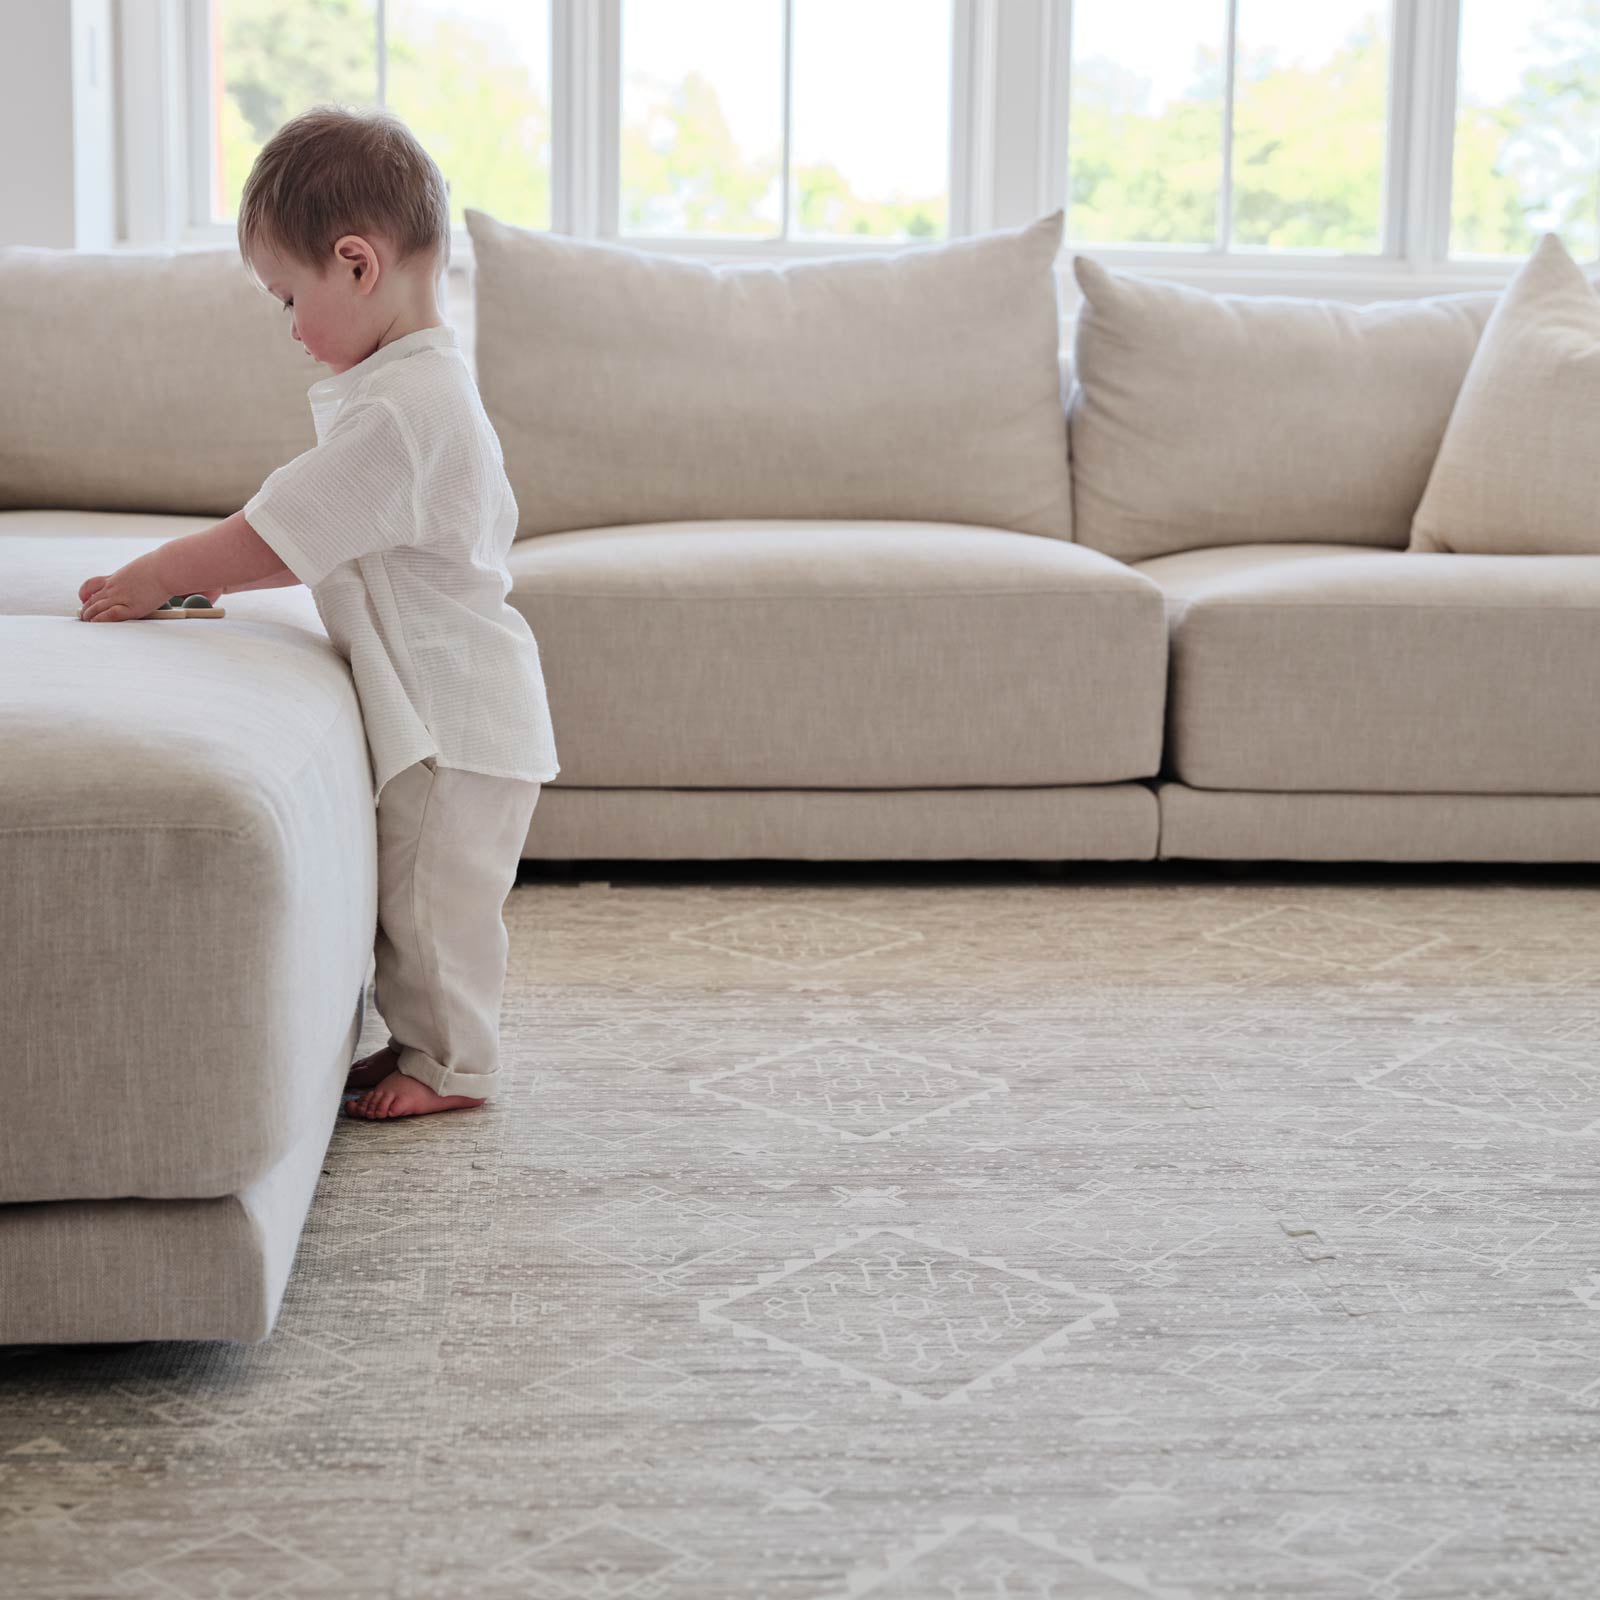 Ula driftwood neutral boho pattern play mat shown in a living room with a toddler boy playing with a toy standing against a light beige linen couch